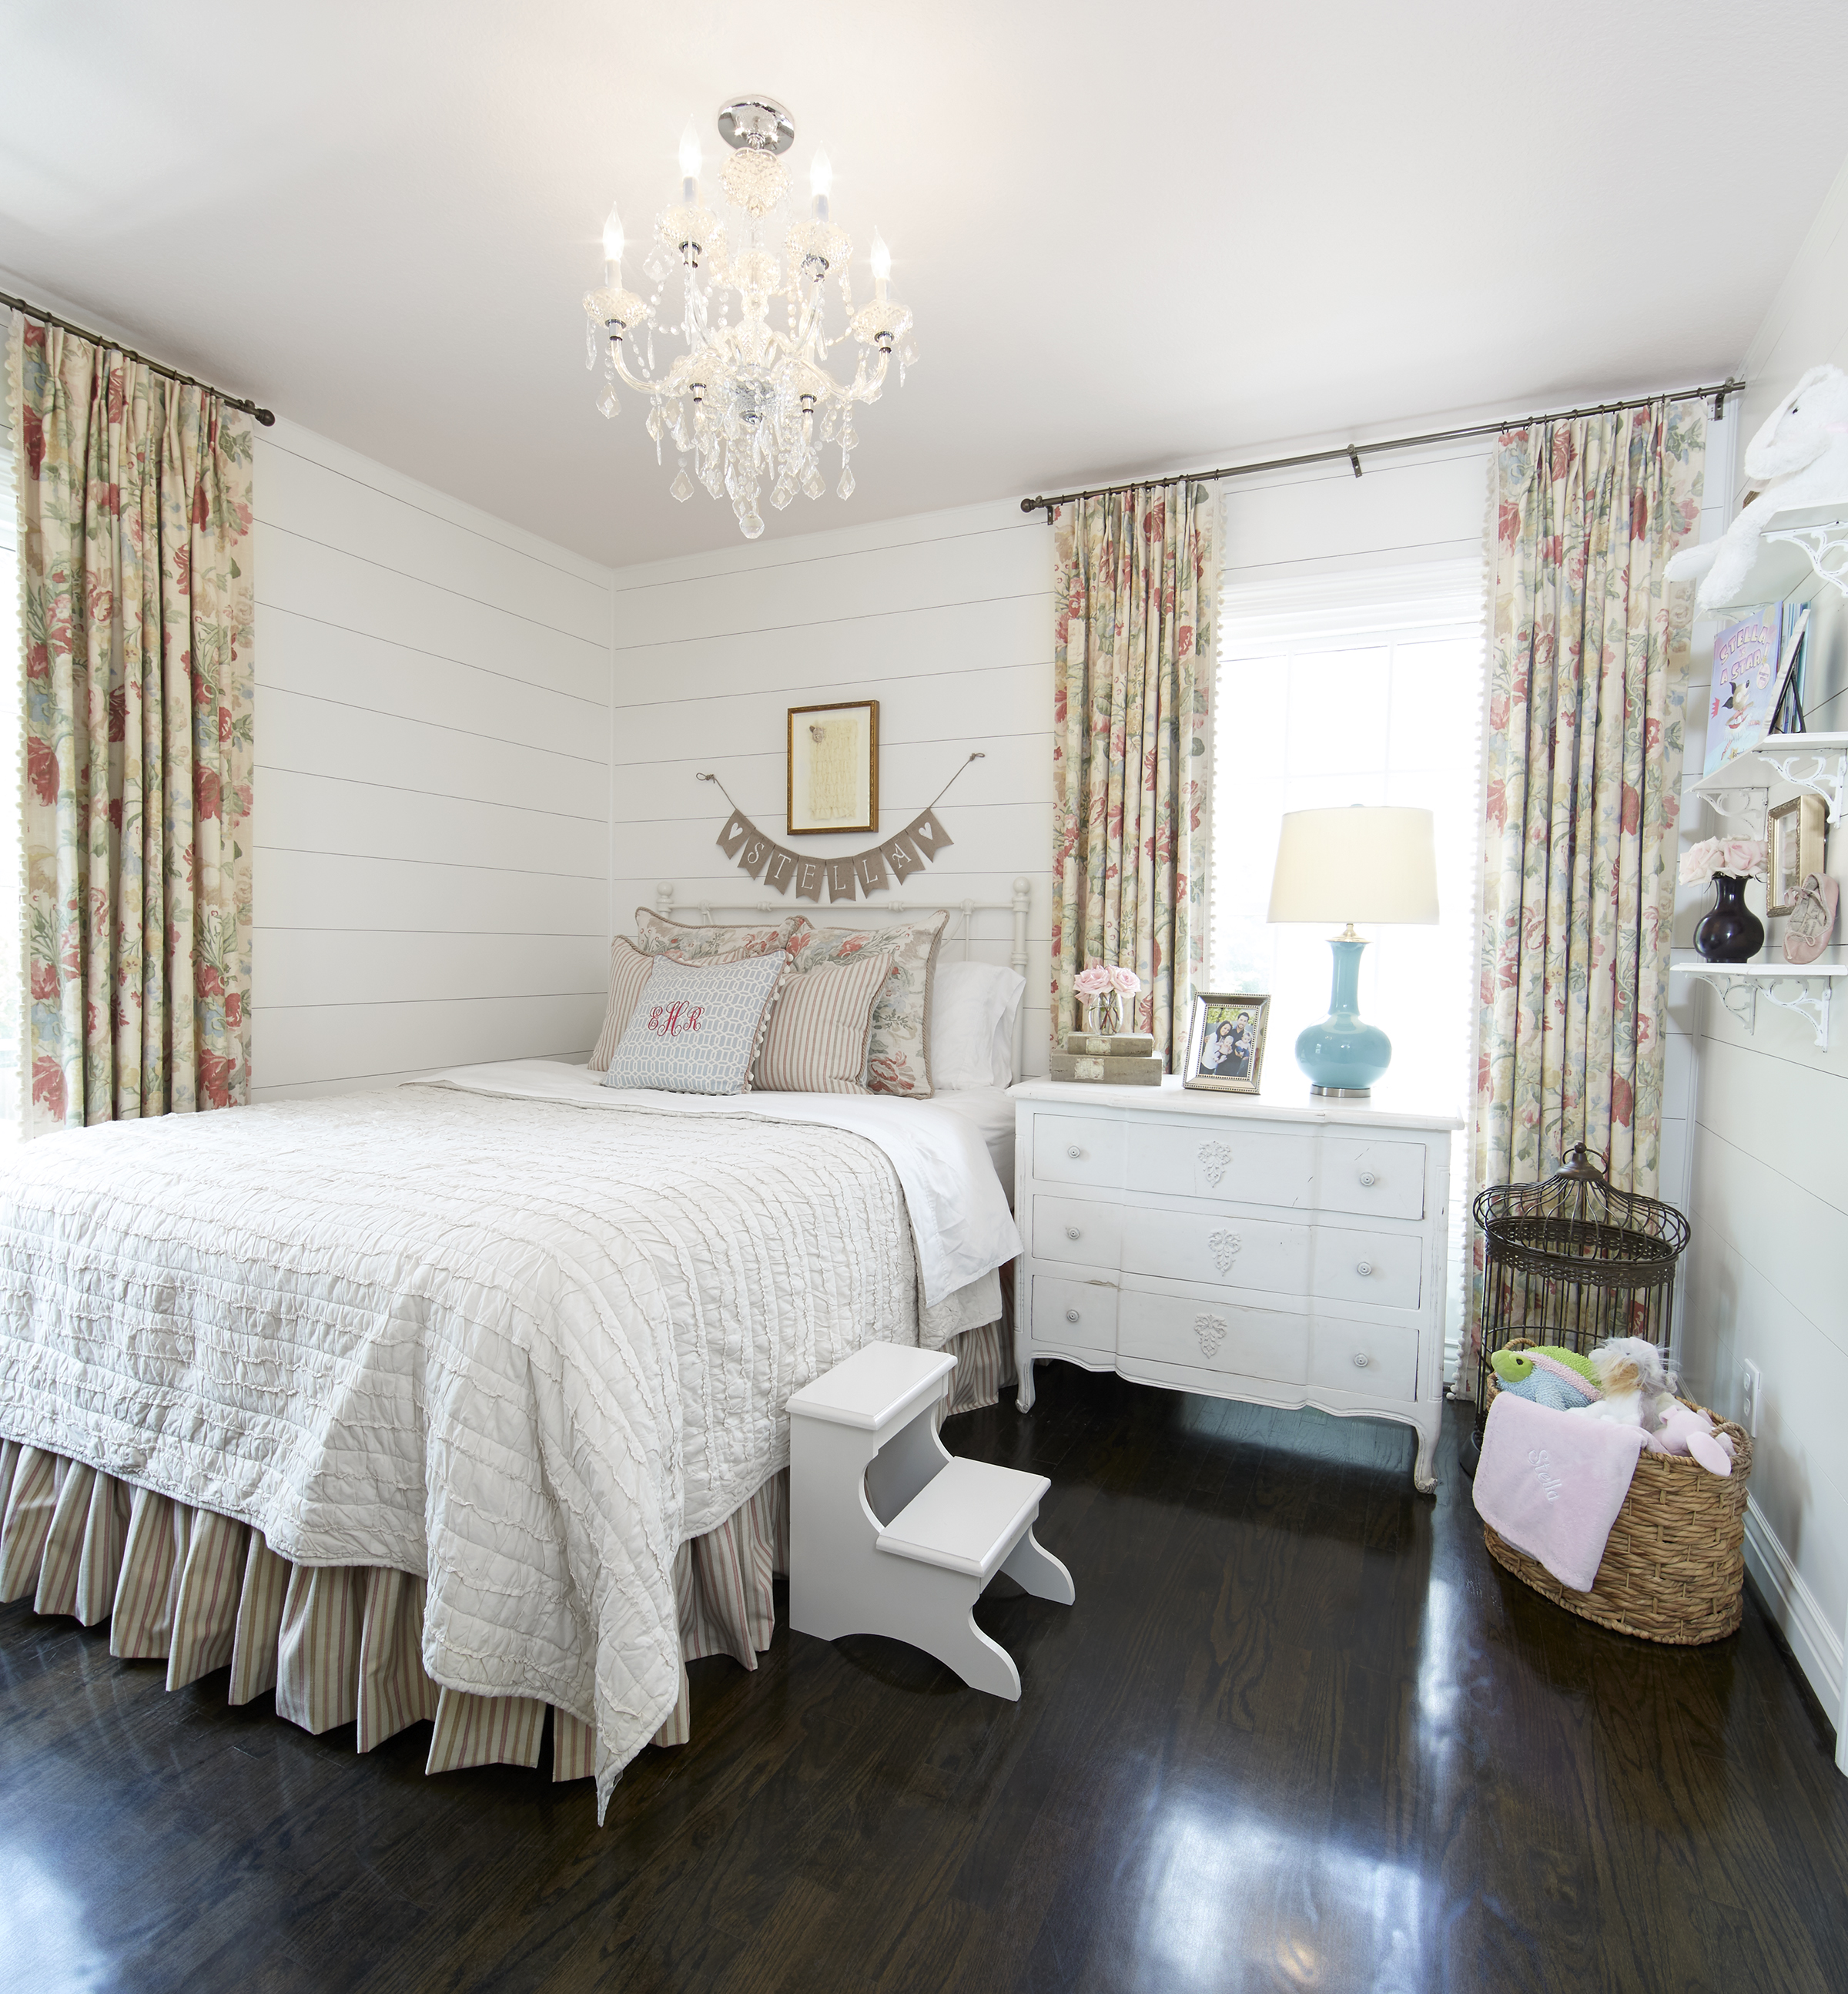 Each room in the house has a cohesive farmhouse feel, with slight variations to reflect the personalities of family member. With floral accents and a chic chandelier, daughter Stella's bedroom offers a shabby elegant spin farmhouse style.